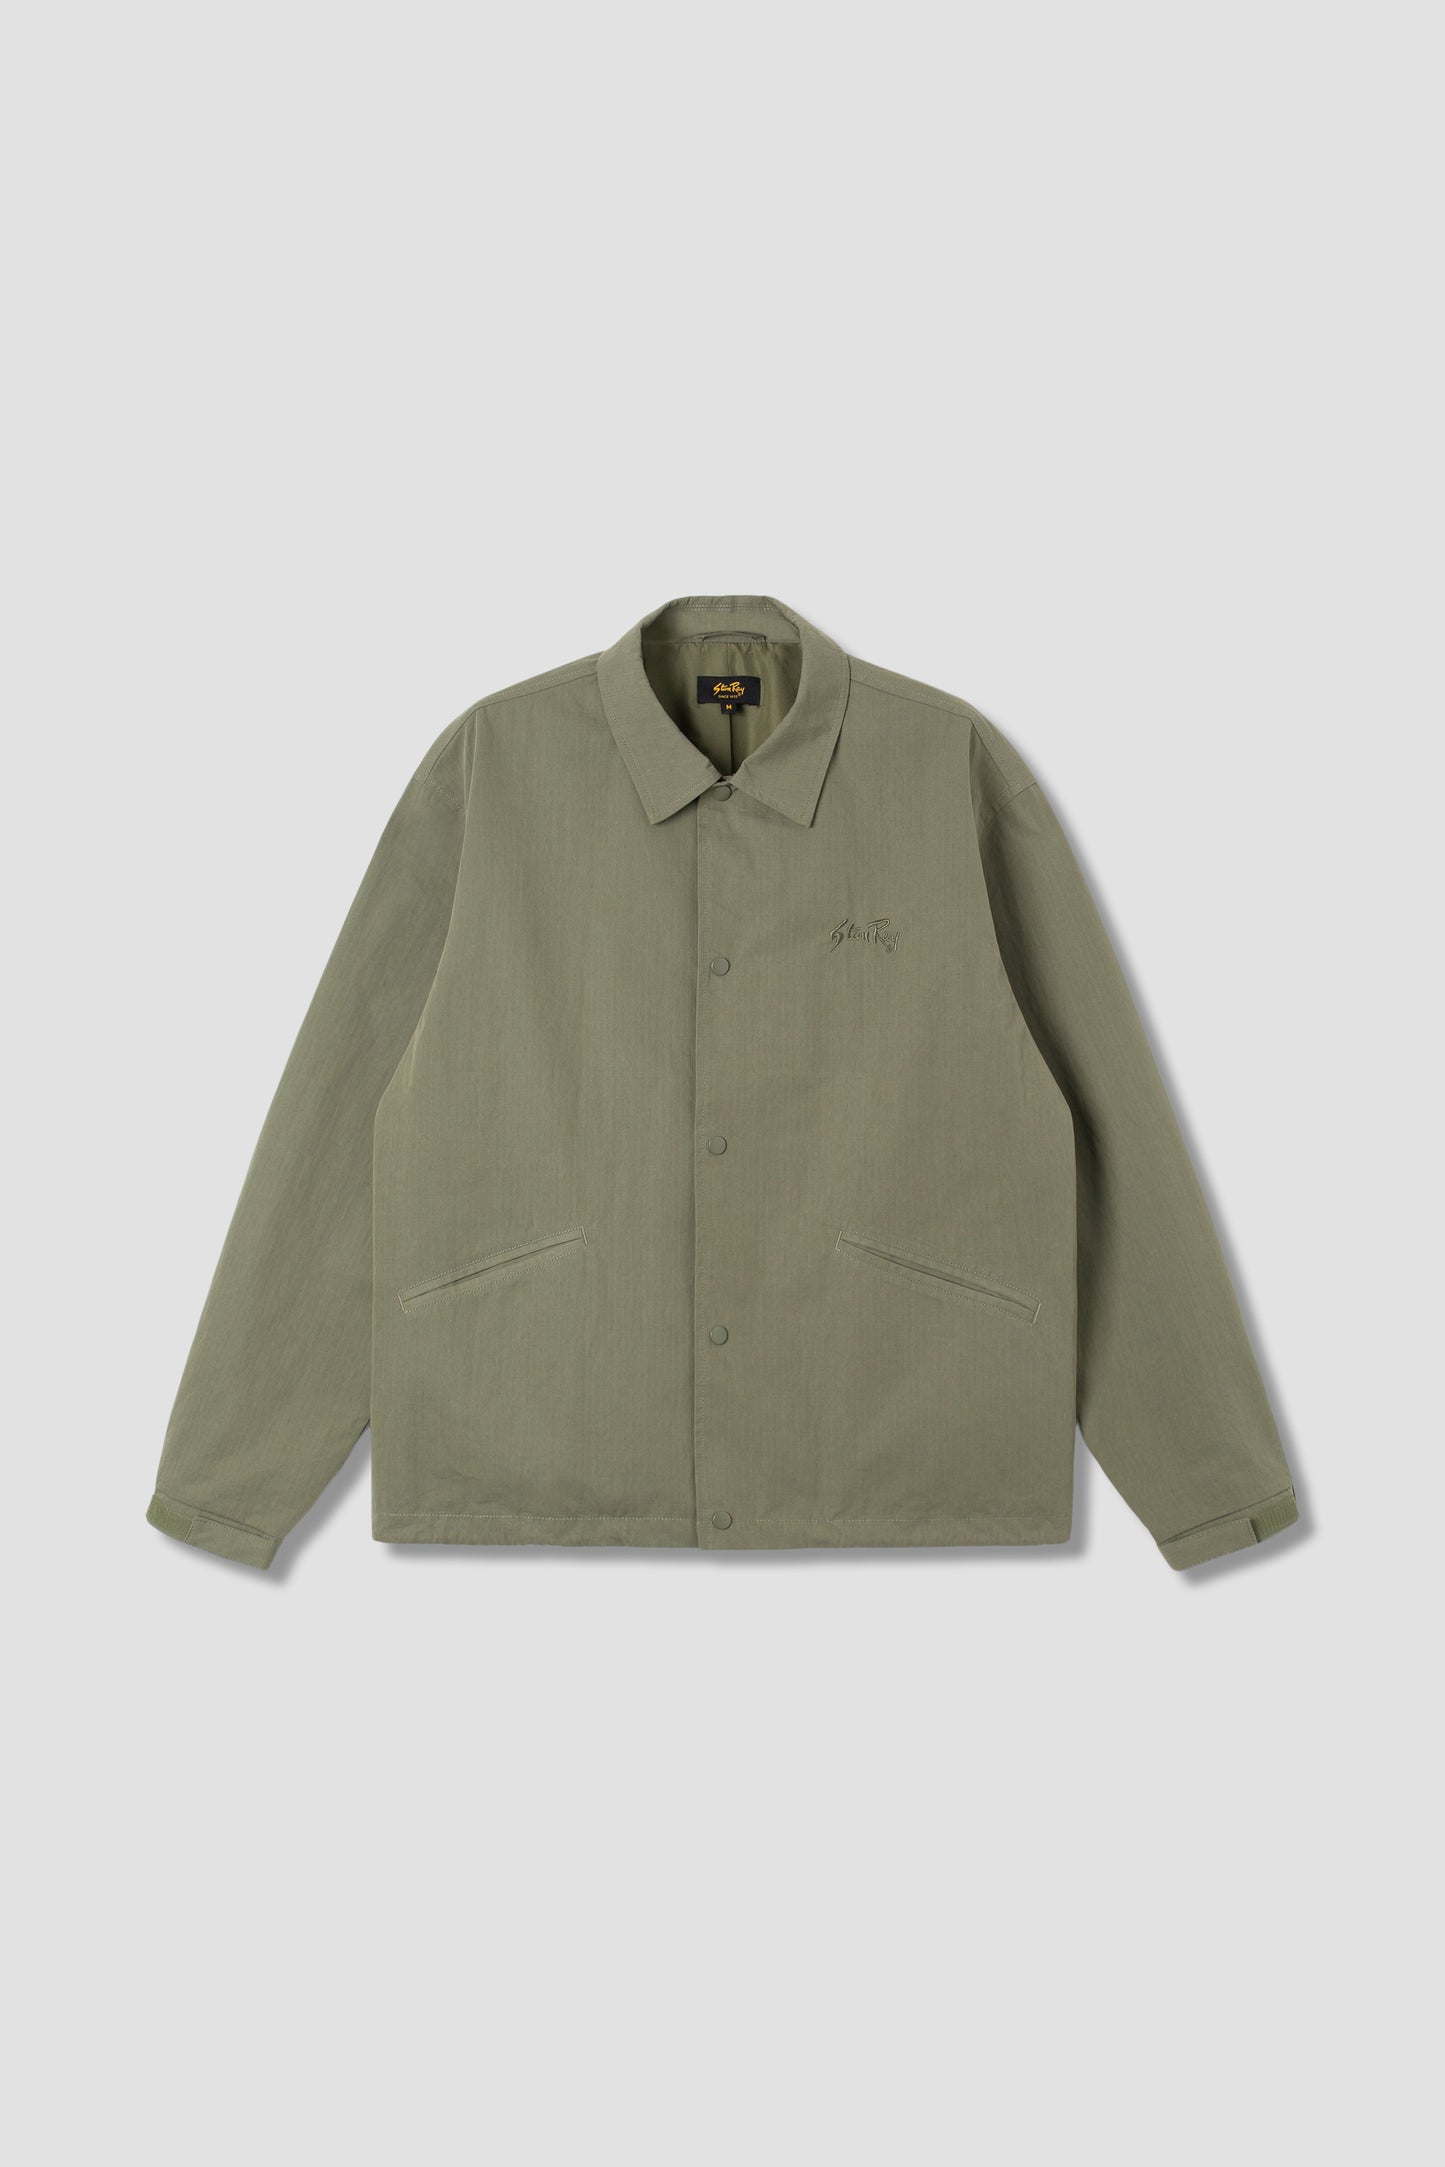 Coach Jacket (Olive Nyco Ripstop)